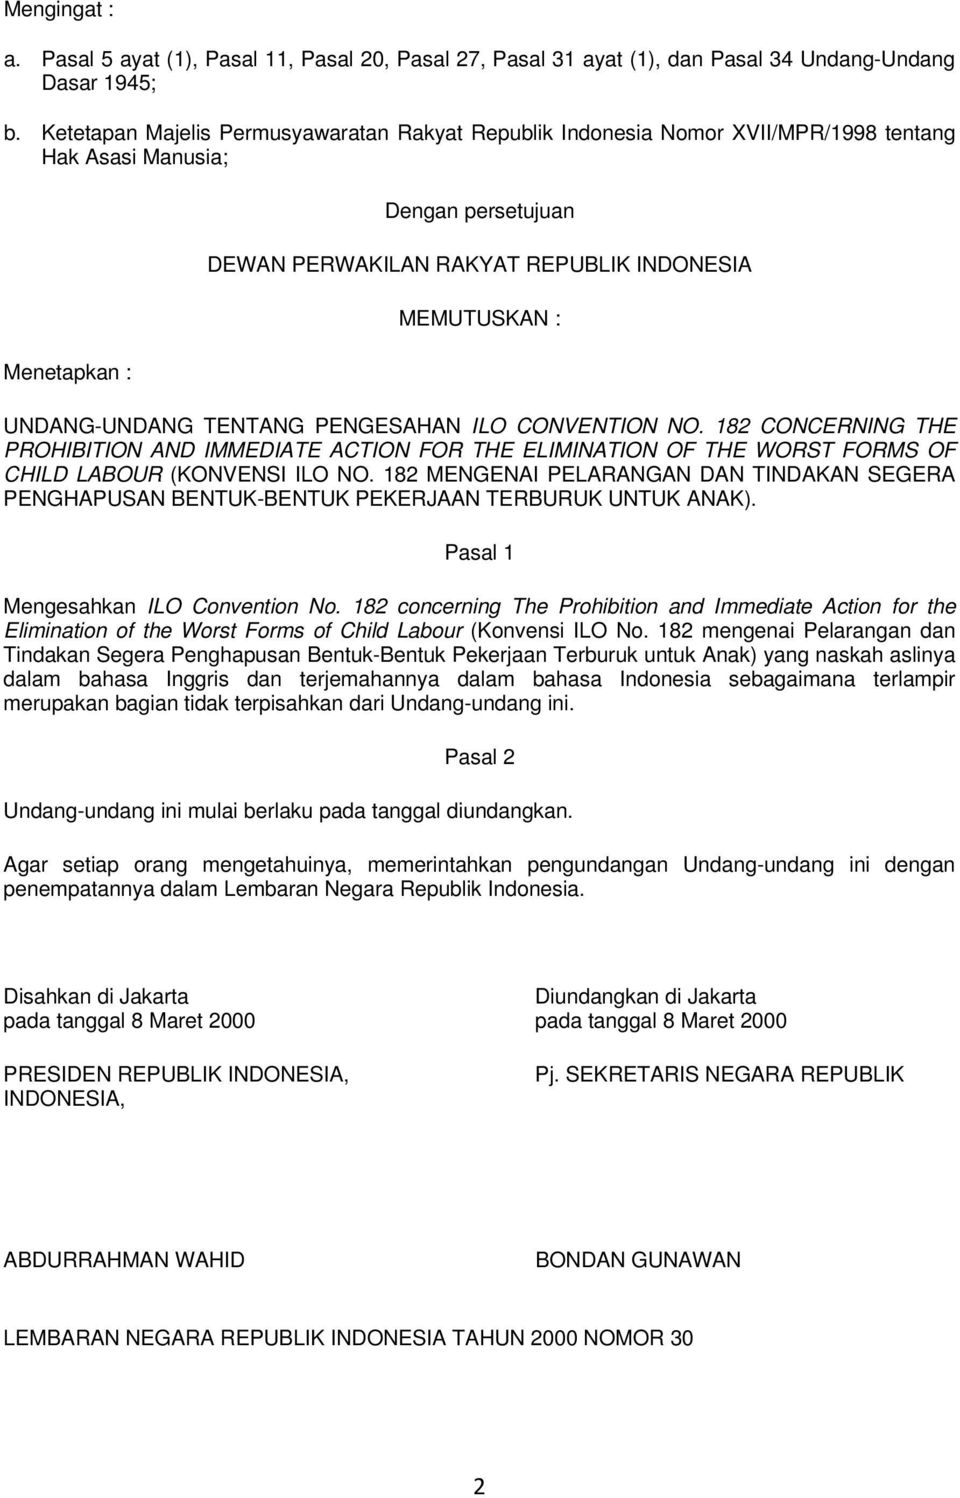 UNDANG-UNDANG TENTANG PENGESAHAN ILO CONVENTION NO. 182 CONCERNING THE PROHIBITION AND IMMEDIATE ACTION FOR THE ELIMINATION OF THE WORST FORMS OF CHILD LABOUR (KONVENSI ILO NO.